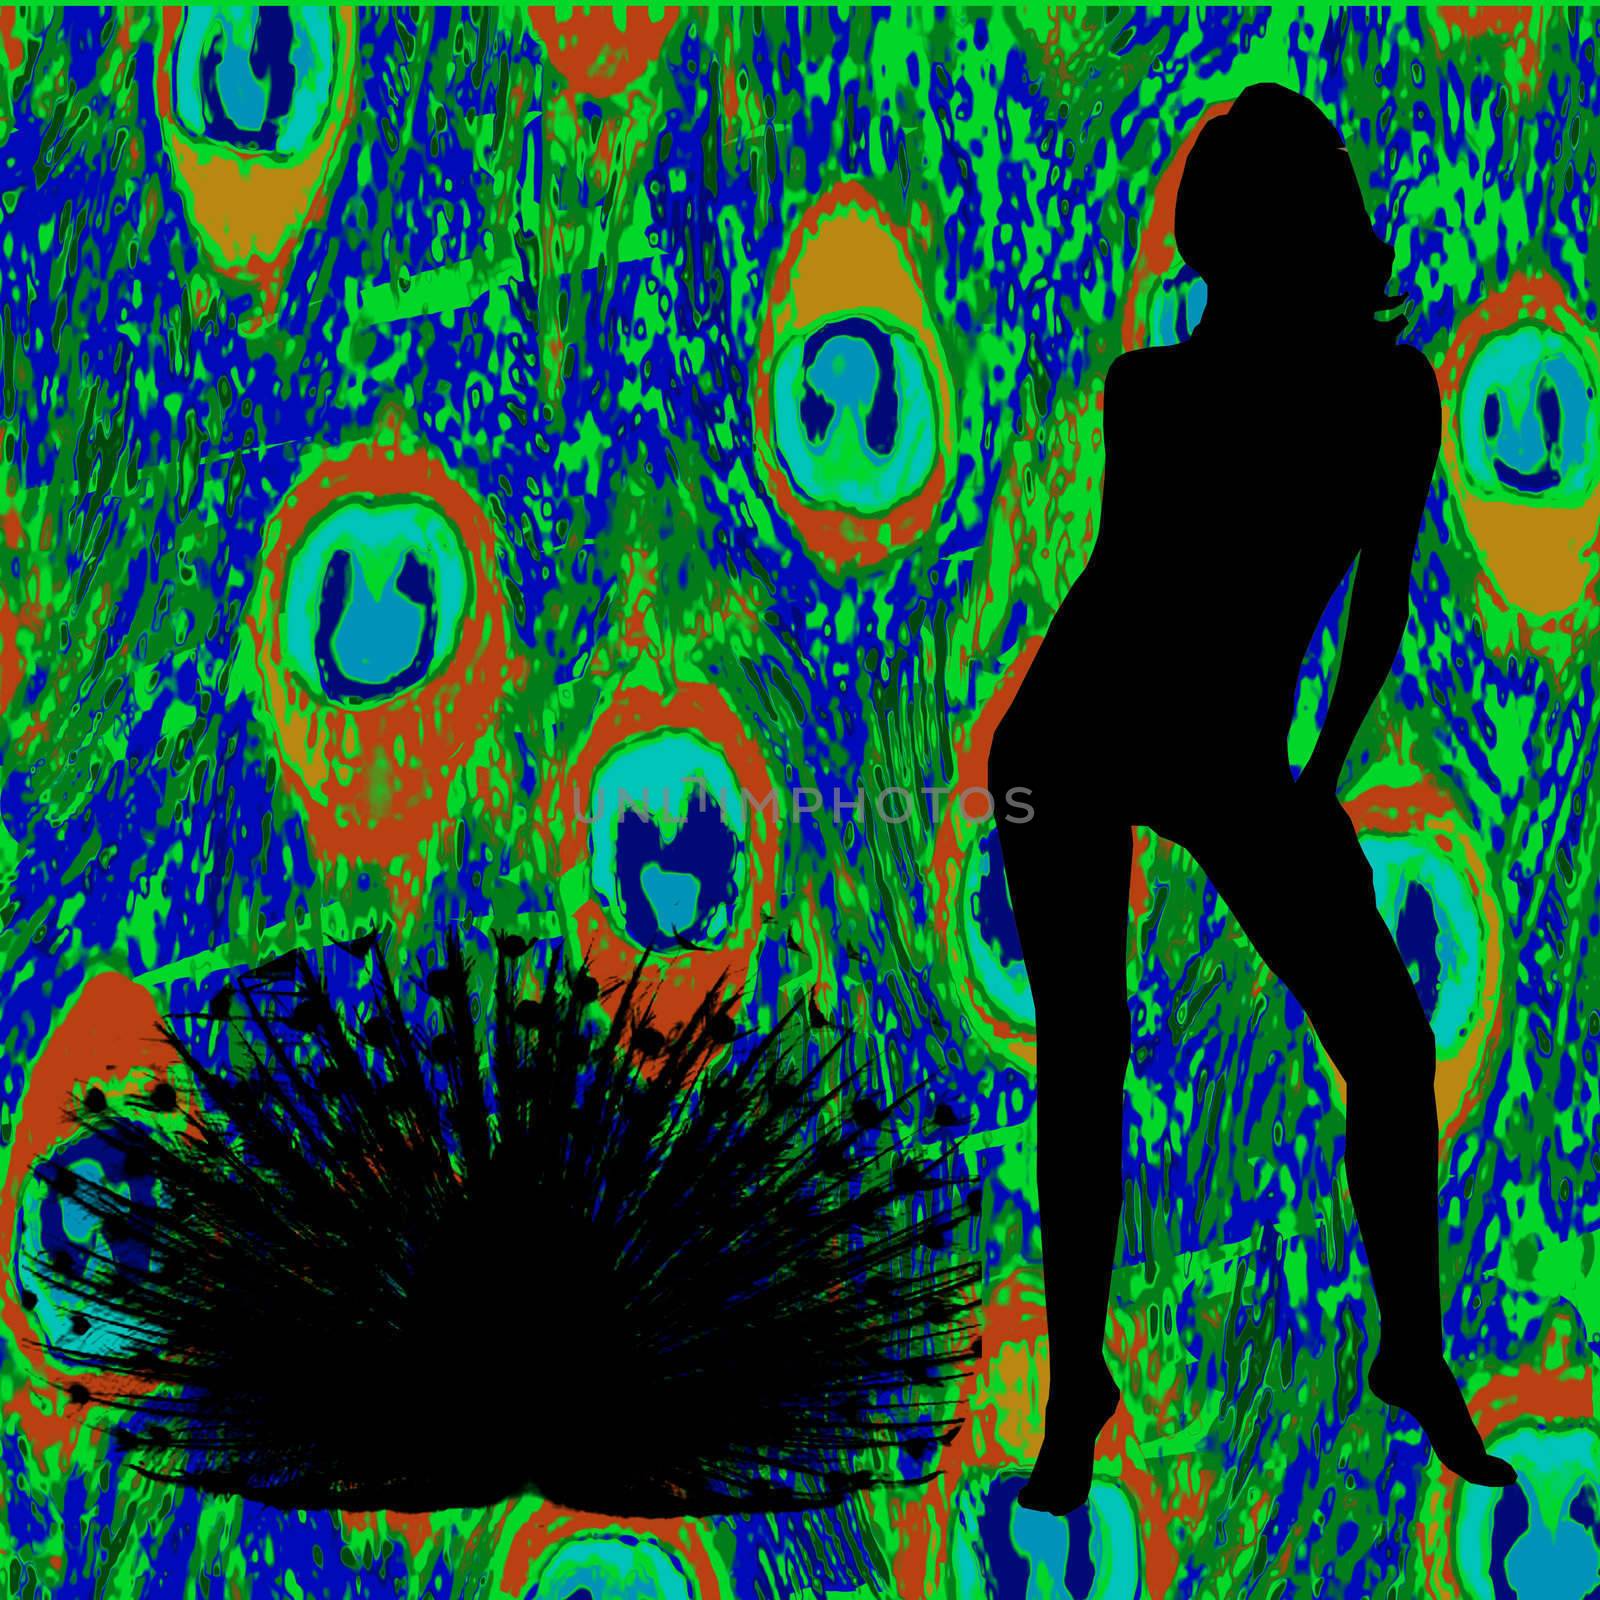 Silhouette woman and peacock against a peacock feather background.